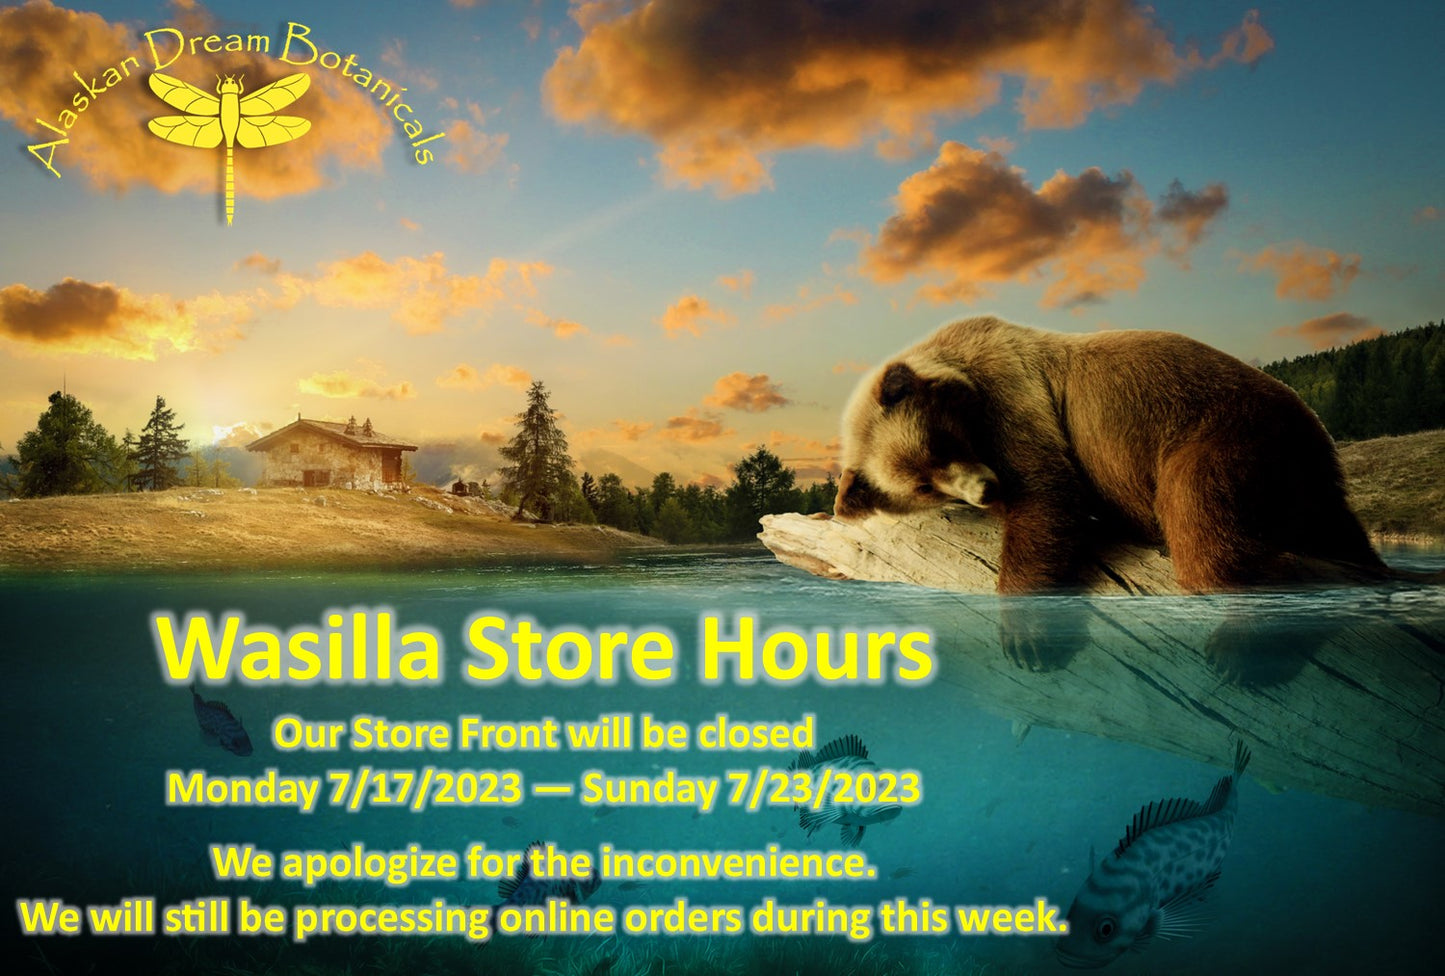 Wasilla Store Hours week of 7/17/2023